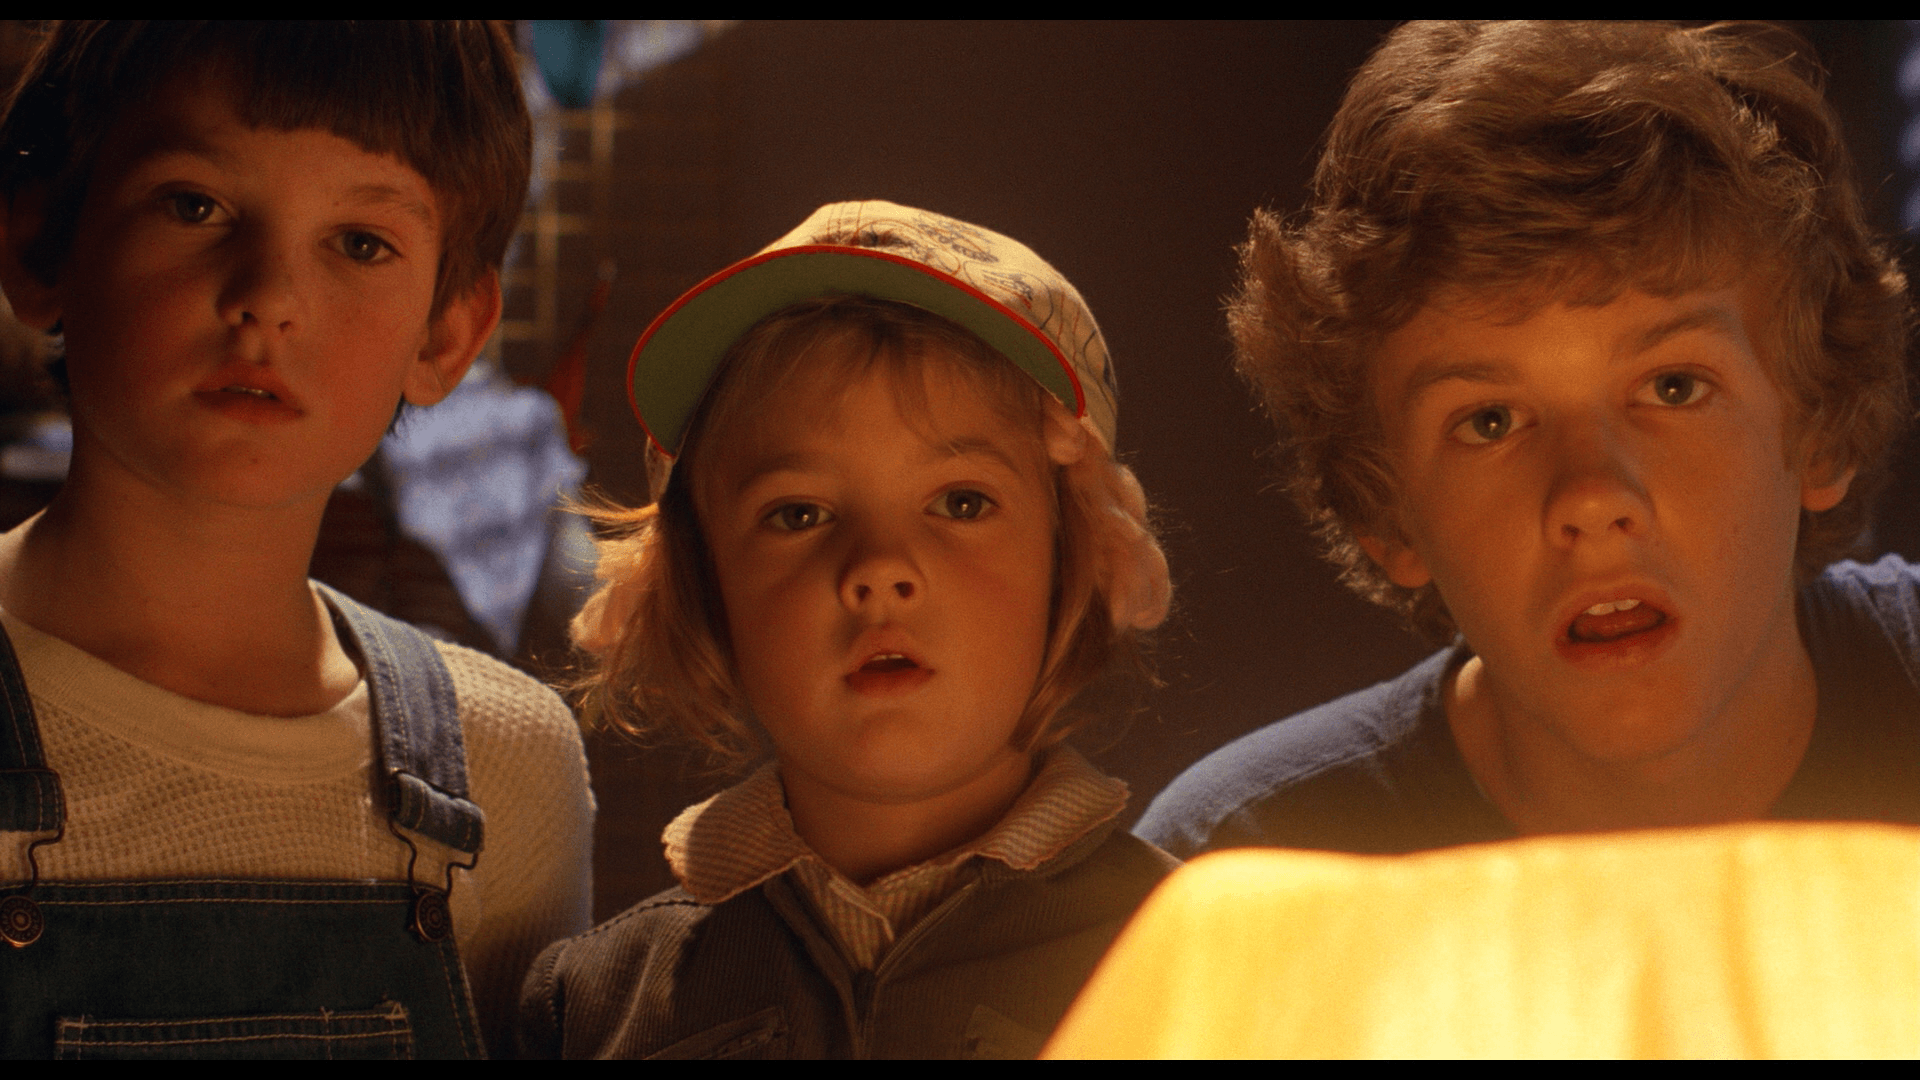 Reflections On E.T. The Extra Terrestrial, Back On The Big Screen 35